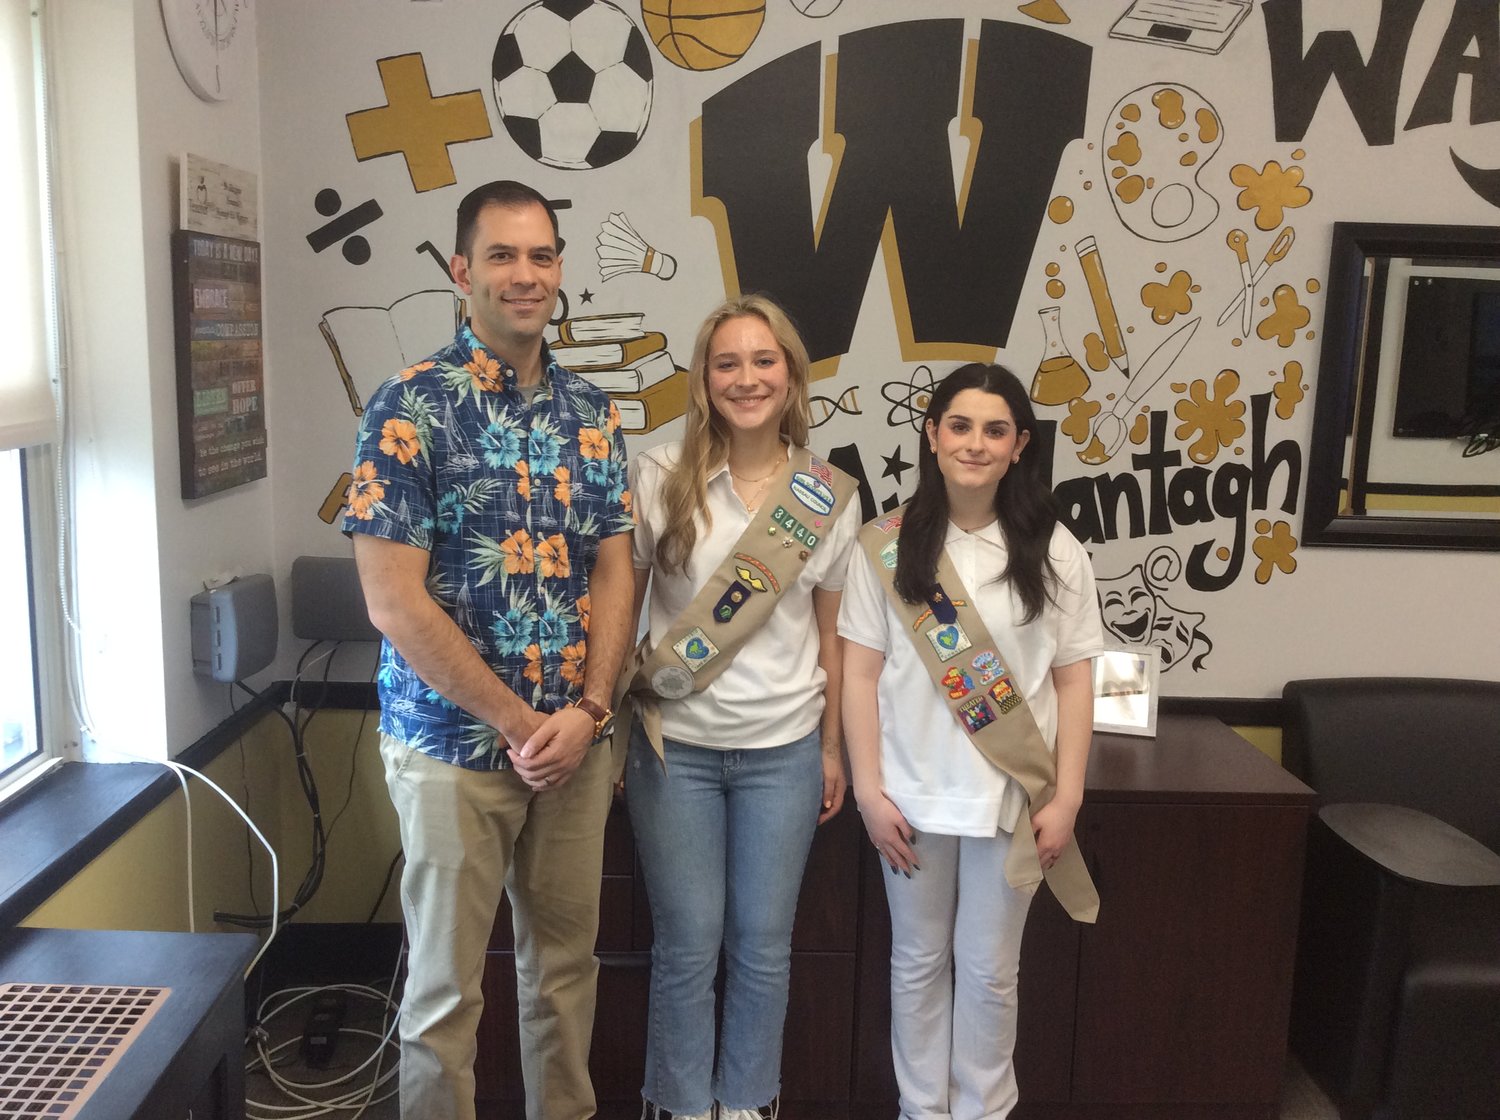 Wantagh High Principal Paul Guzzone congratulated seniors Angelina Bendetti and Nicole Tobia for receiving the Girl Scout Gold Award.